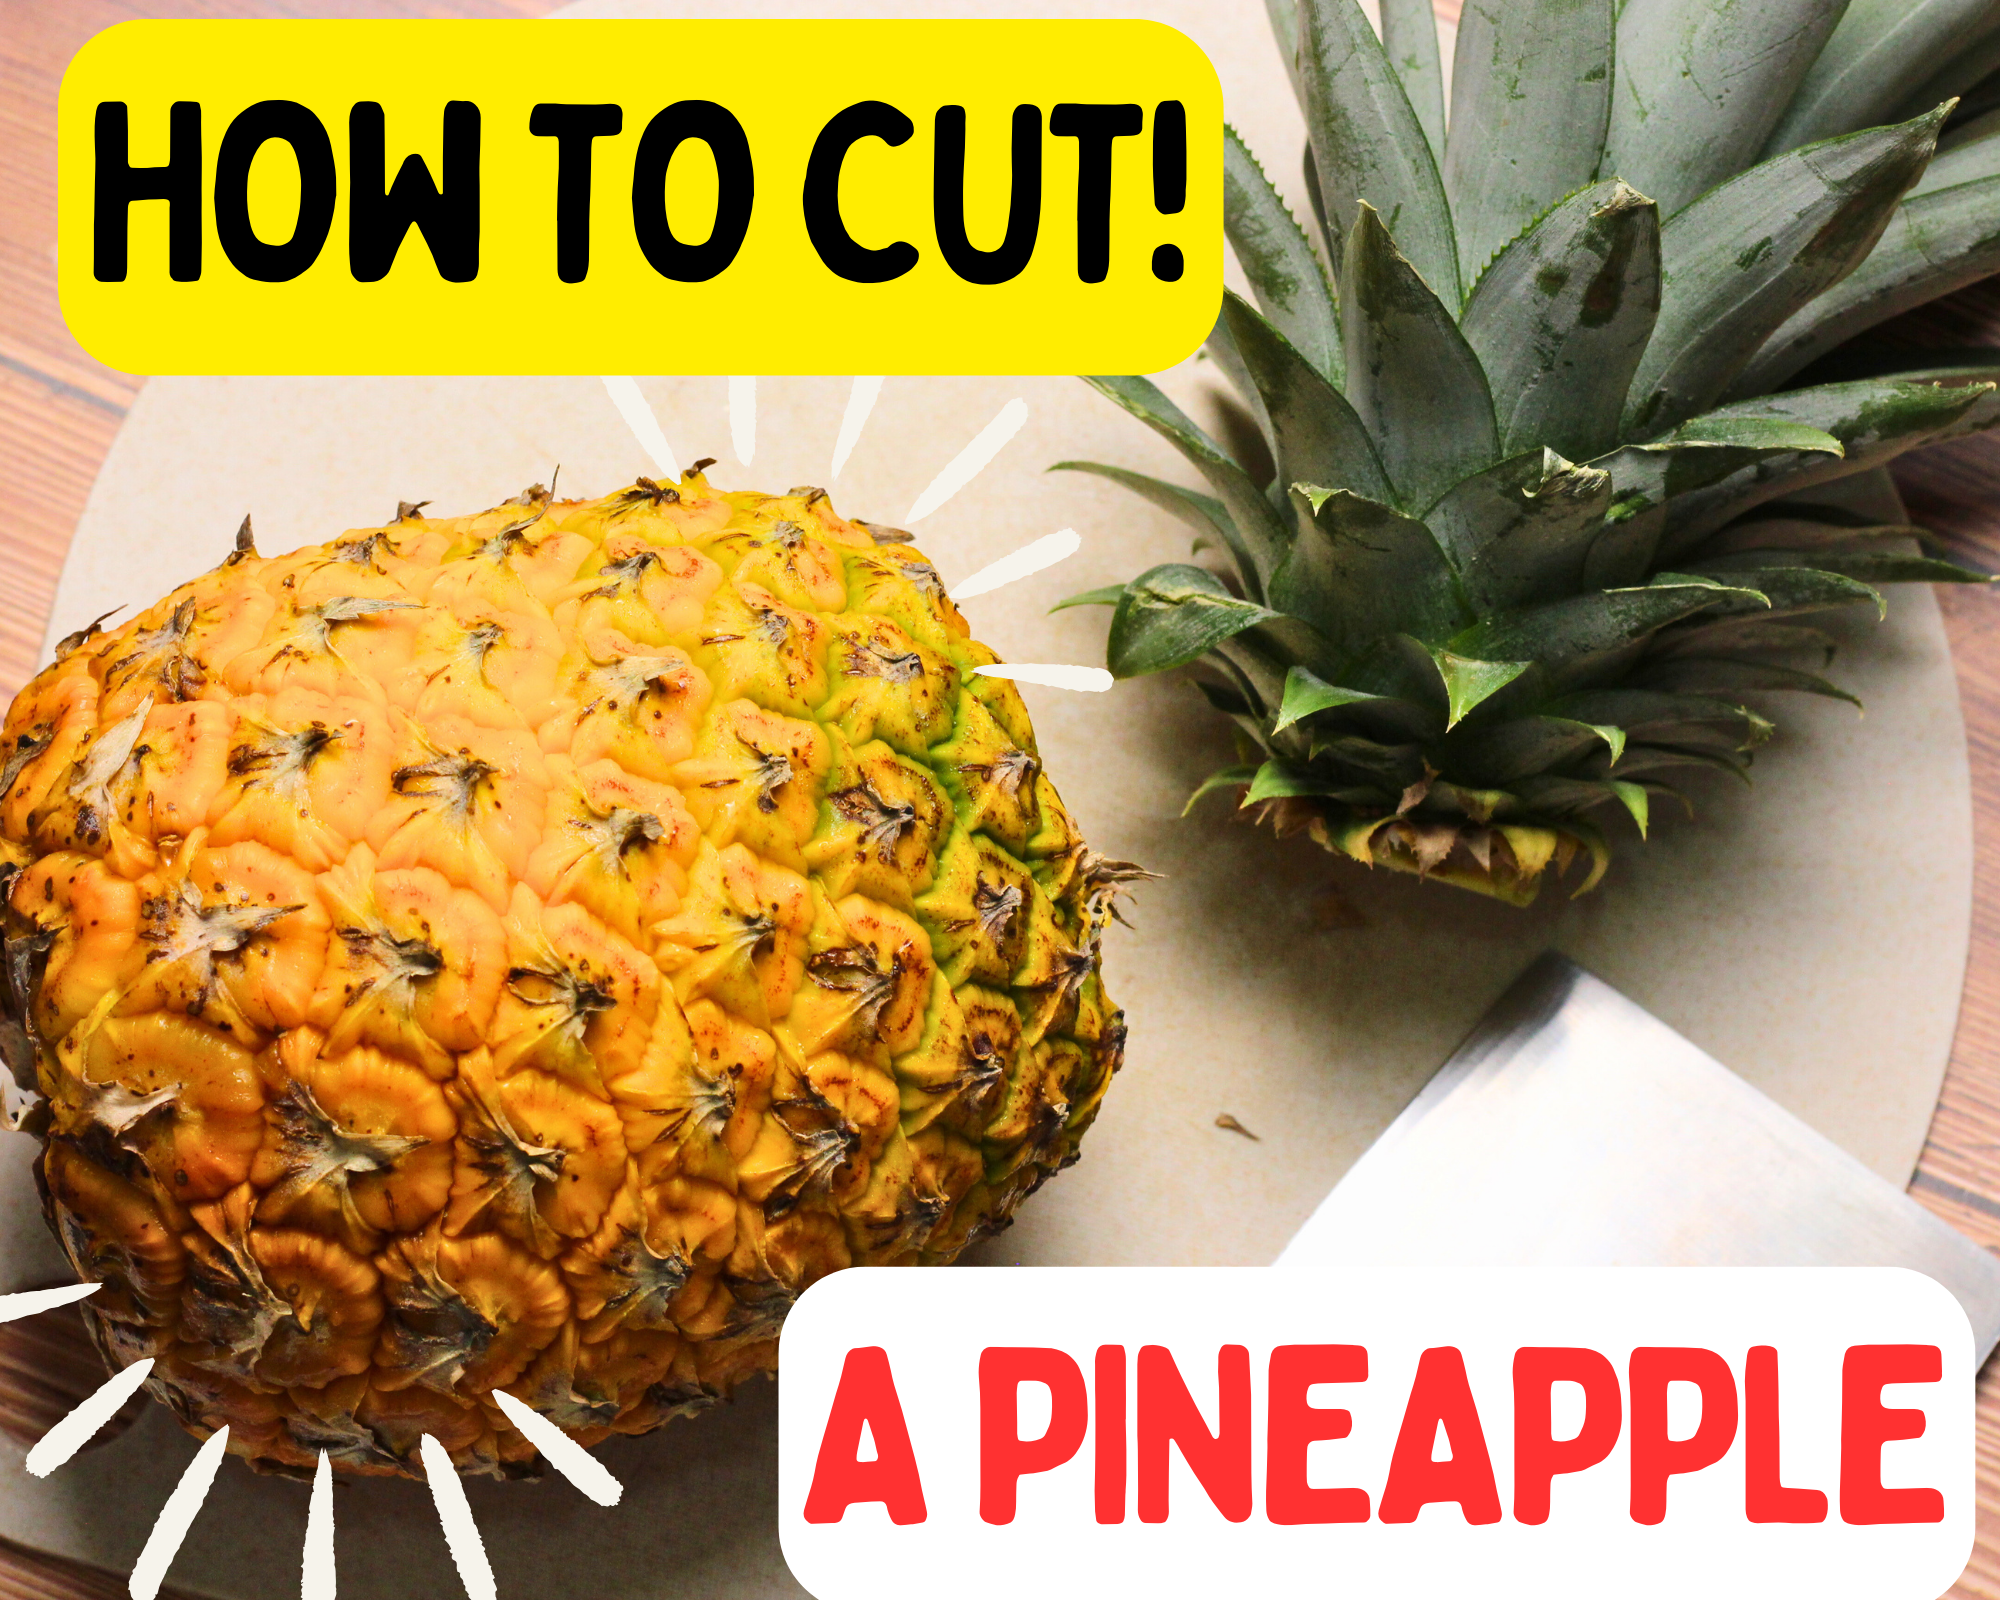 HOW TO-CUT-PINEAPPLE-STEP-BY-STEP